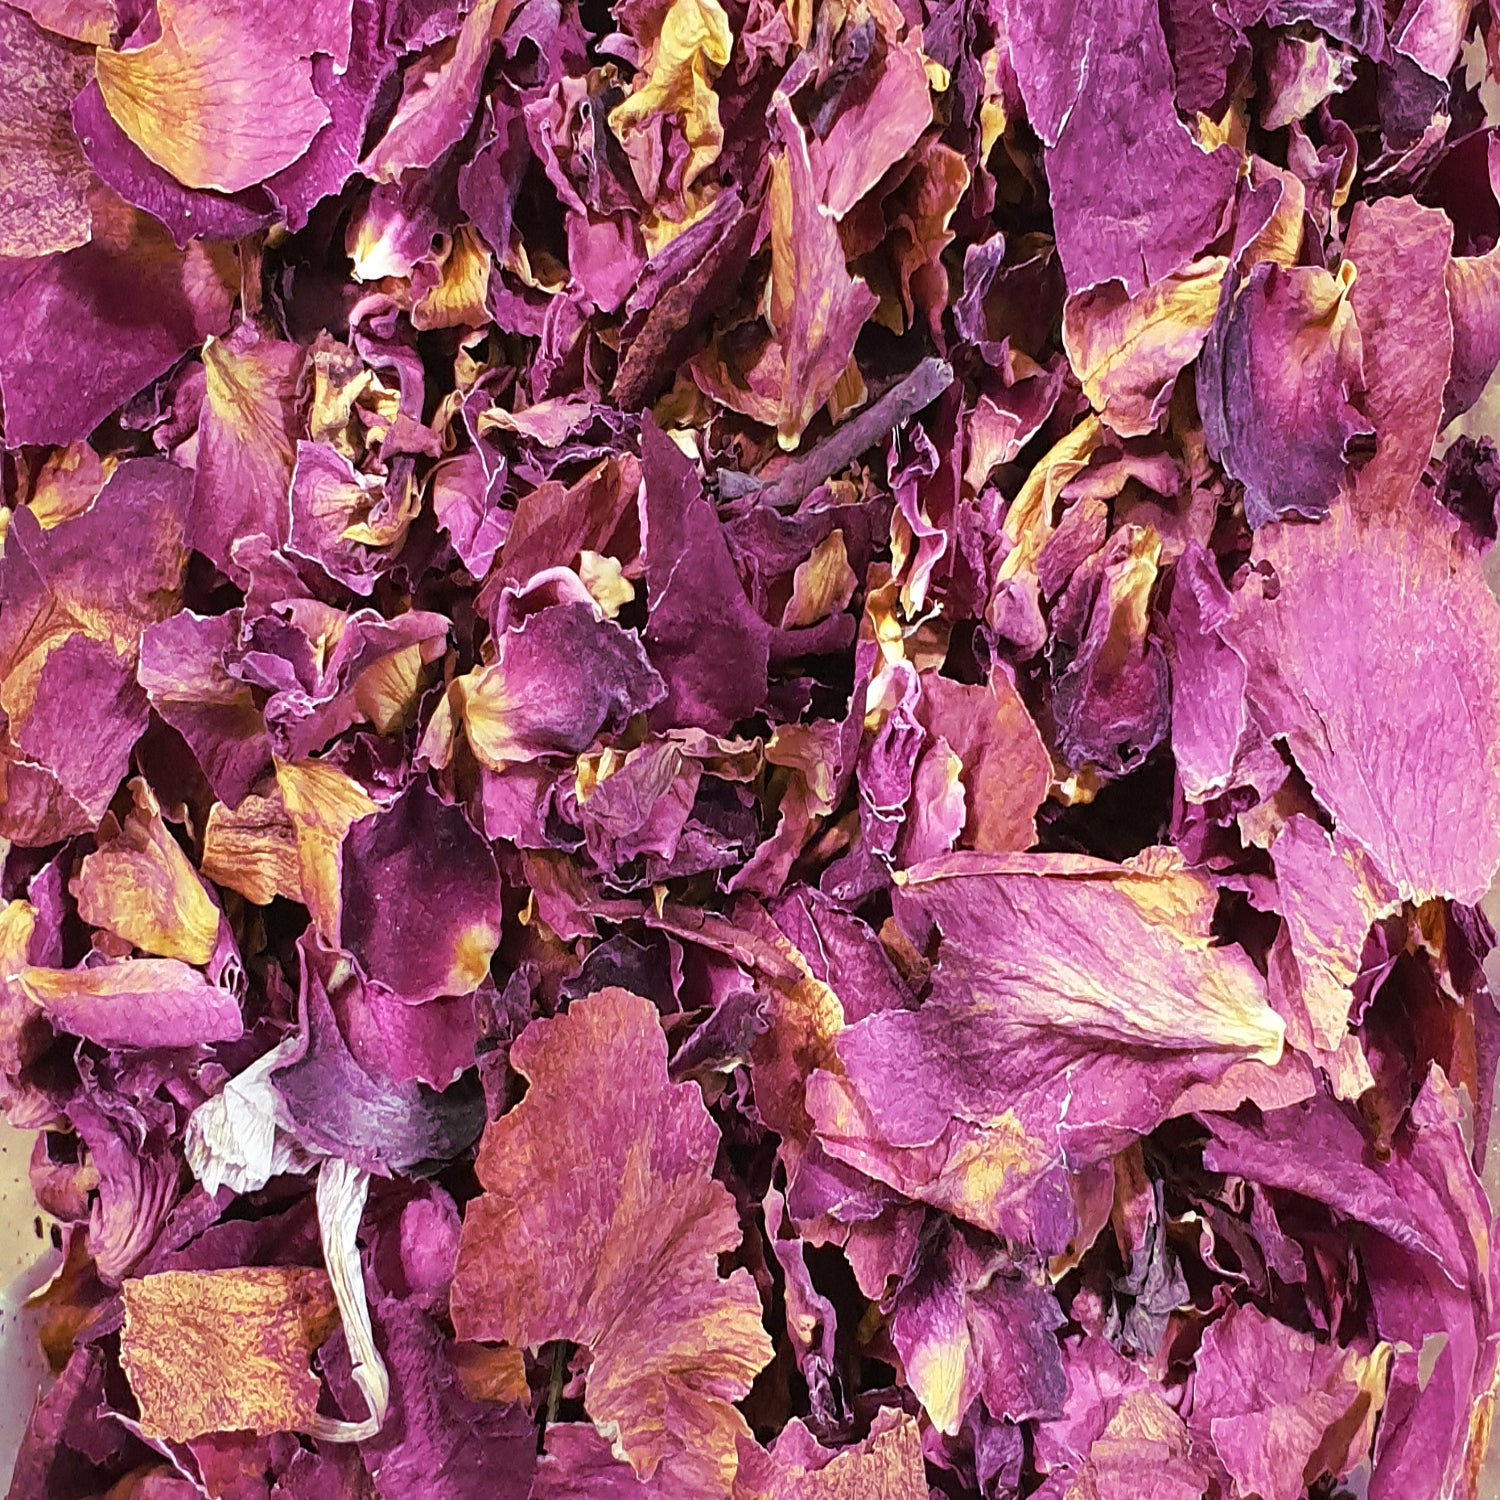 Rose petal magickal uses include promoting fertility, family, blessings, love, luck, happiness and blessings